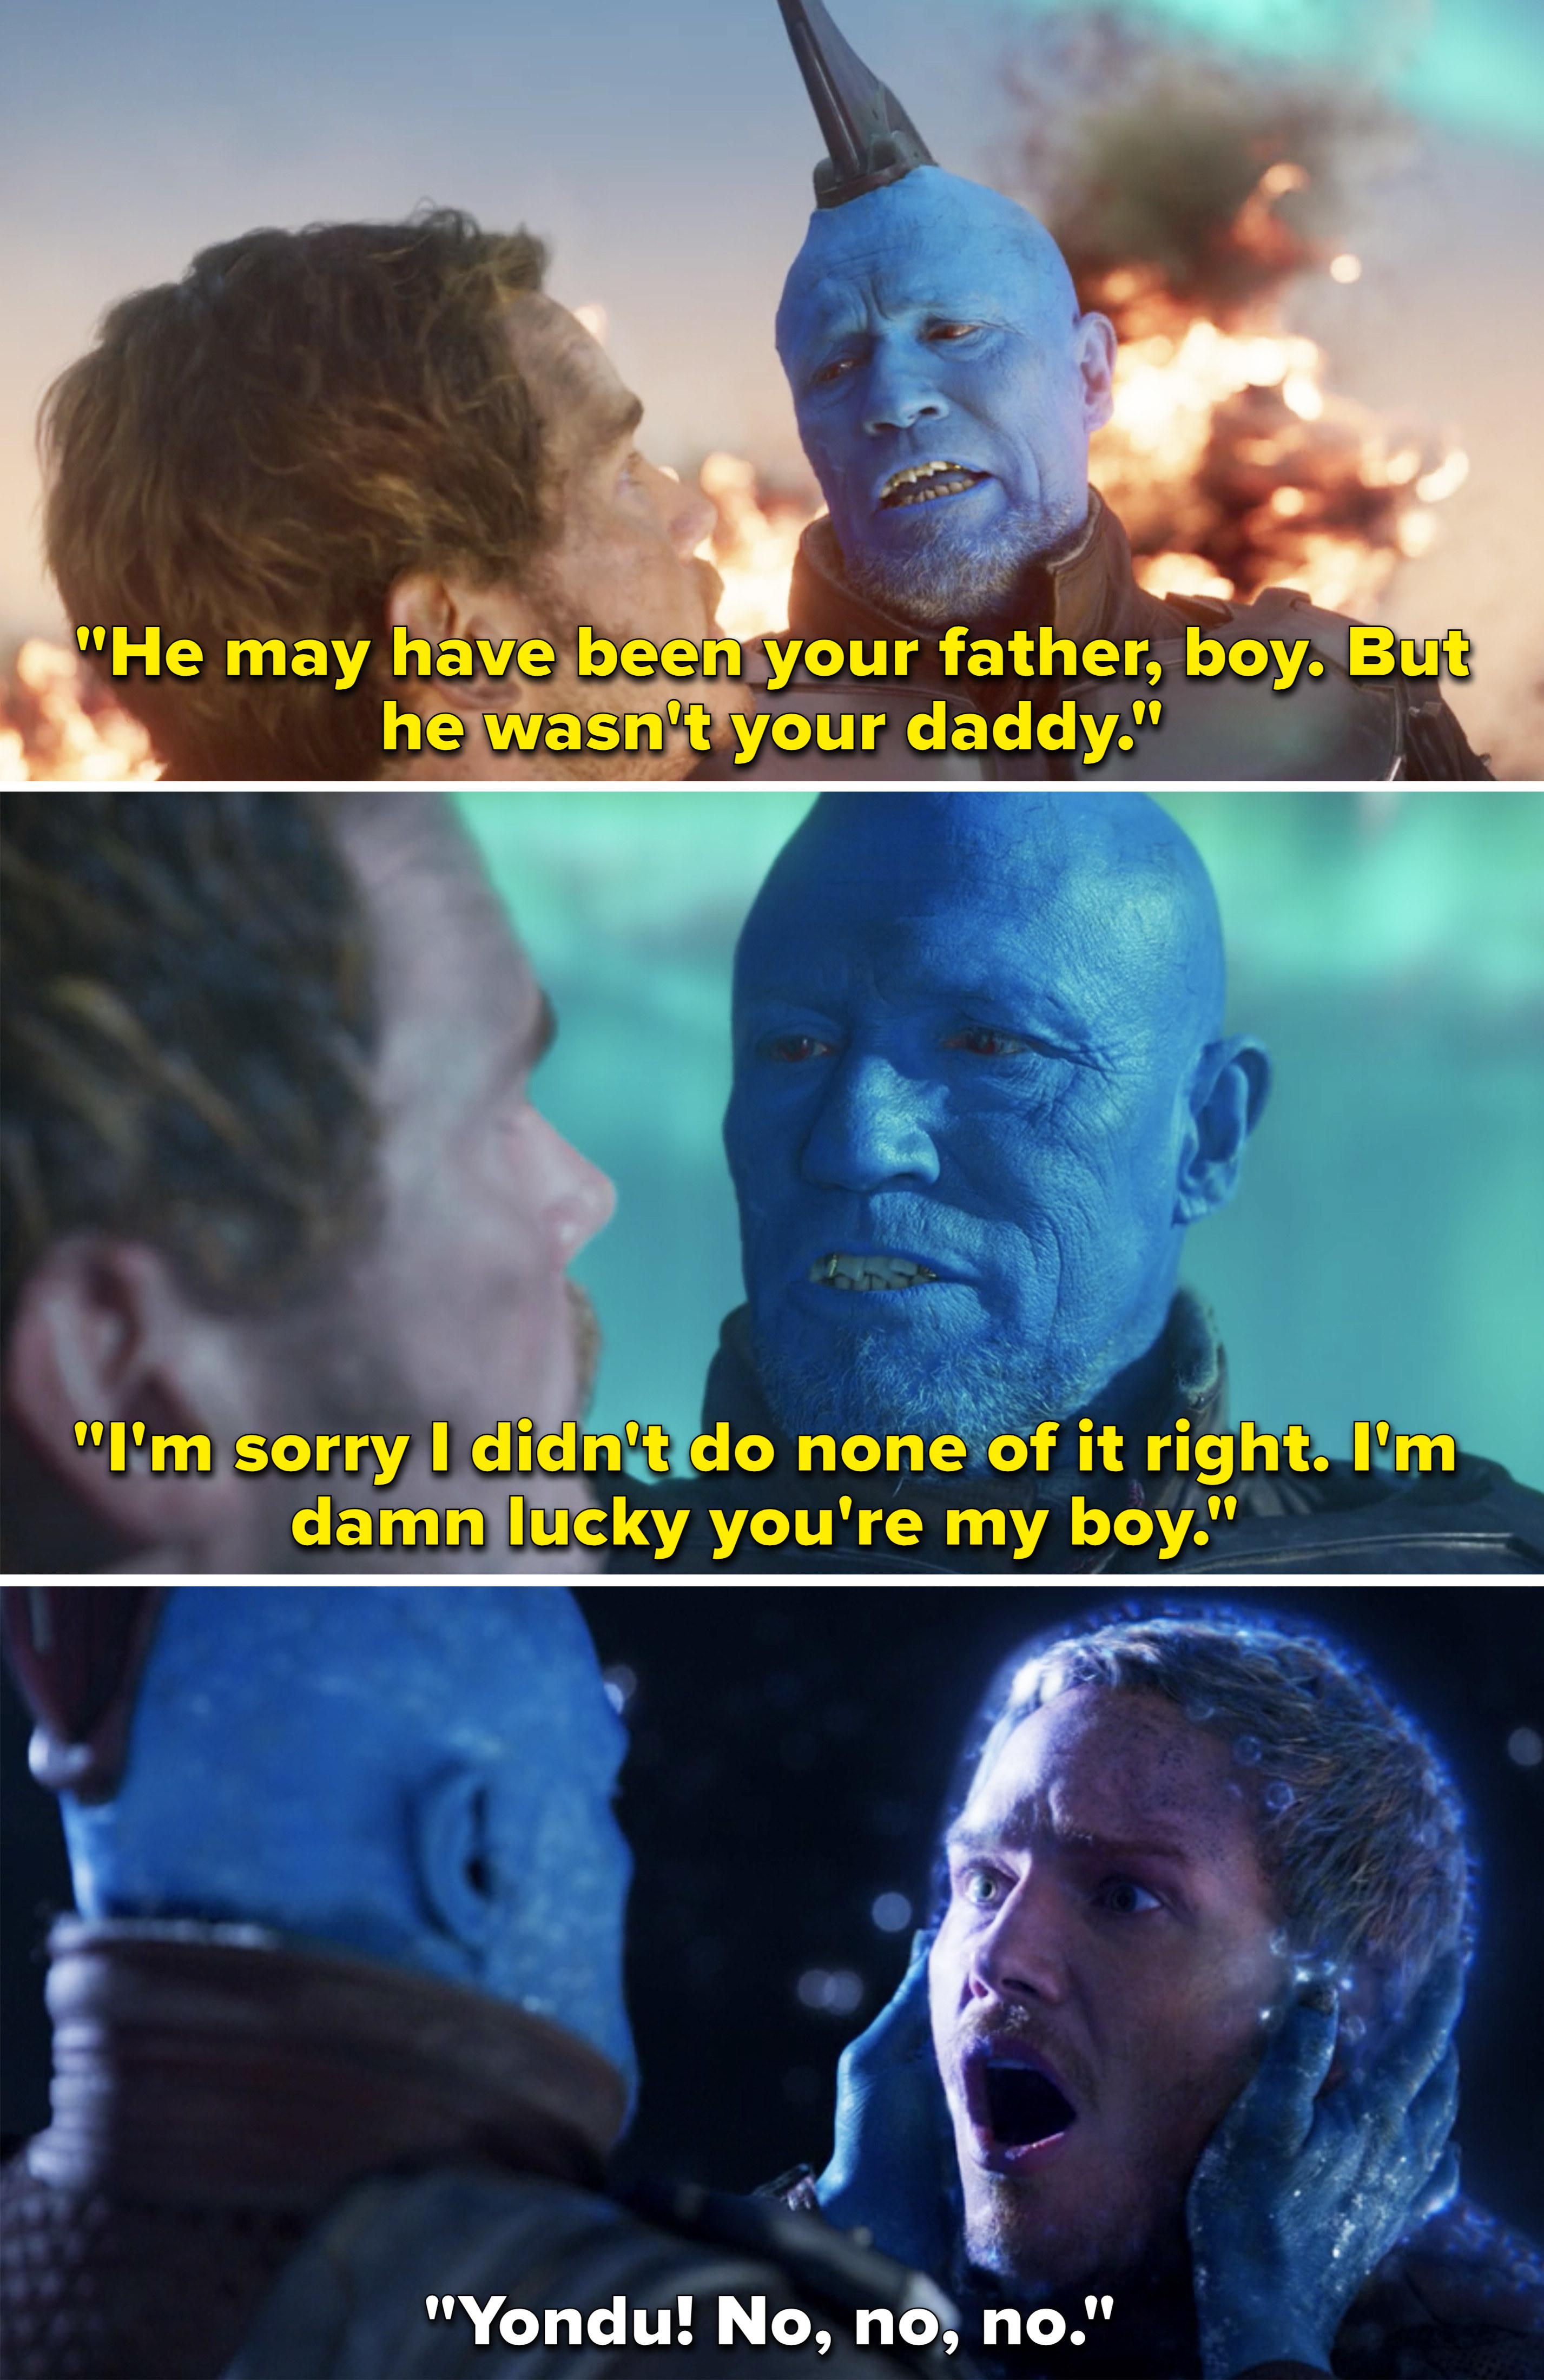 Yondu saying he was lucky to have Peter as a son